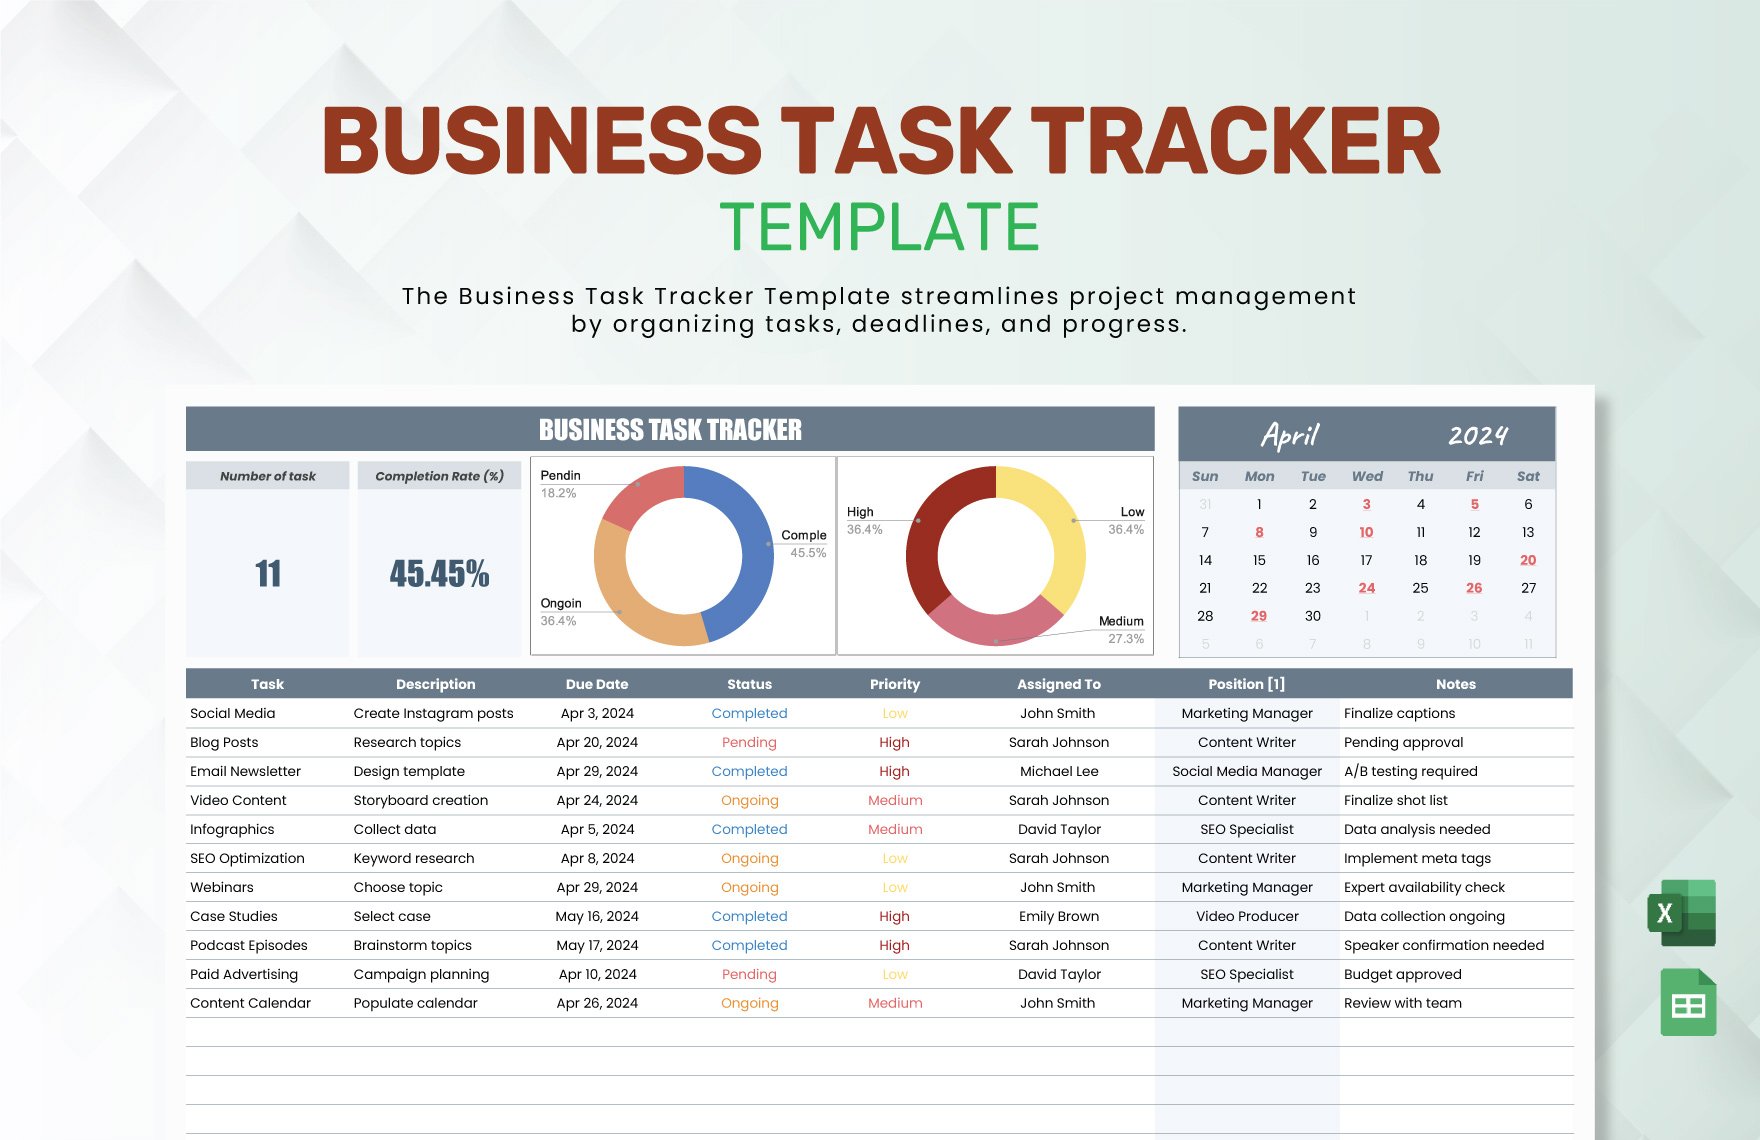 Business Task Tracker Template in Excel, Google Sheets